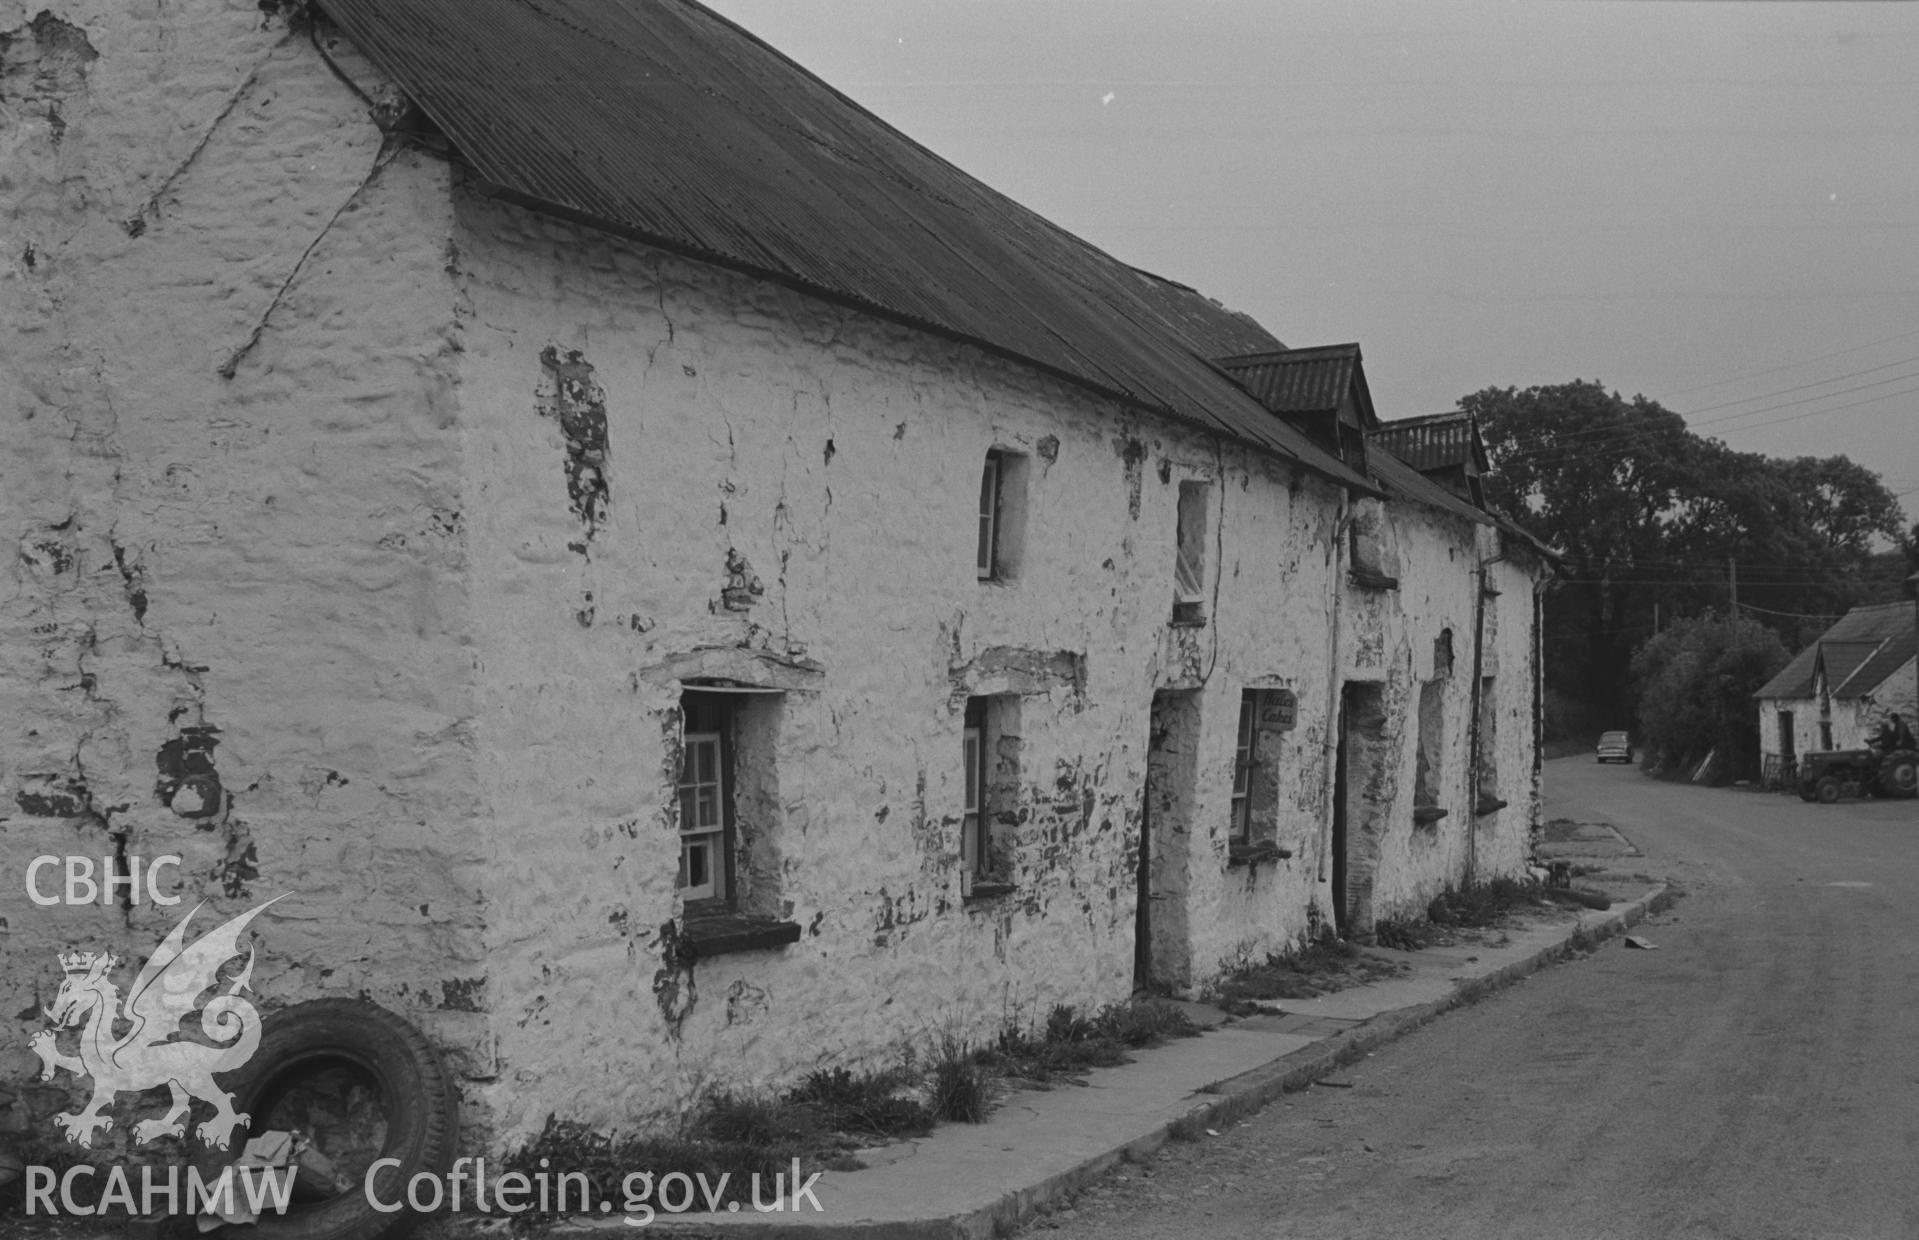 Digital copy of a black and white negative showing the old shop and cottages on east side of road at Talsarn, south east of Aberaeron. Photographed by Arthur O. Chater on 5th September 1966 looking south south west from Grid Reference SN 545 563.